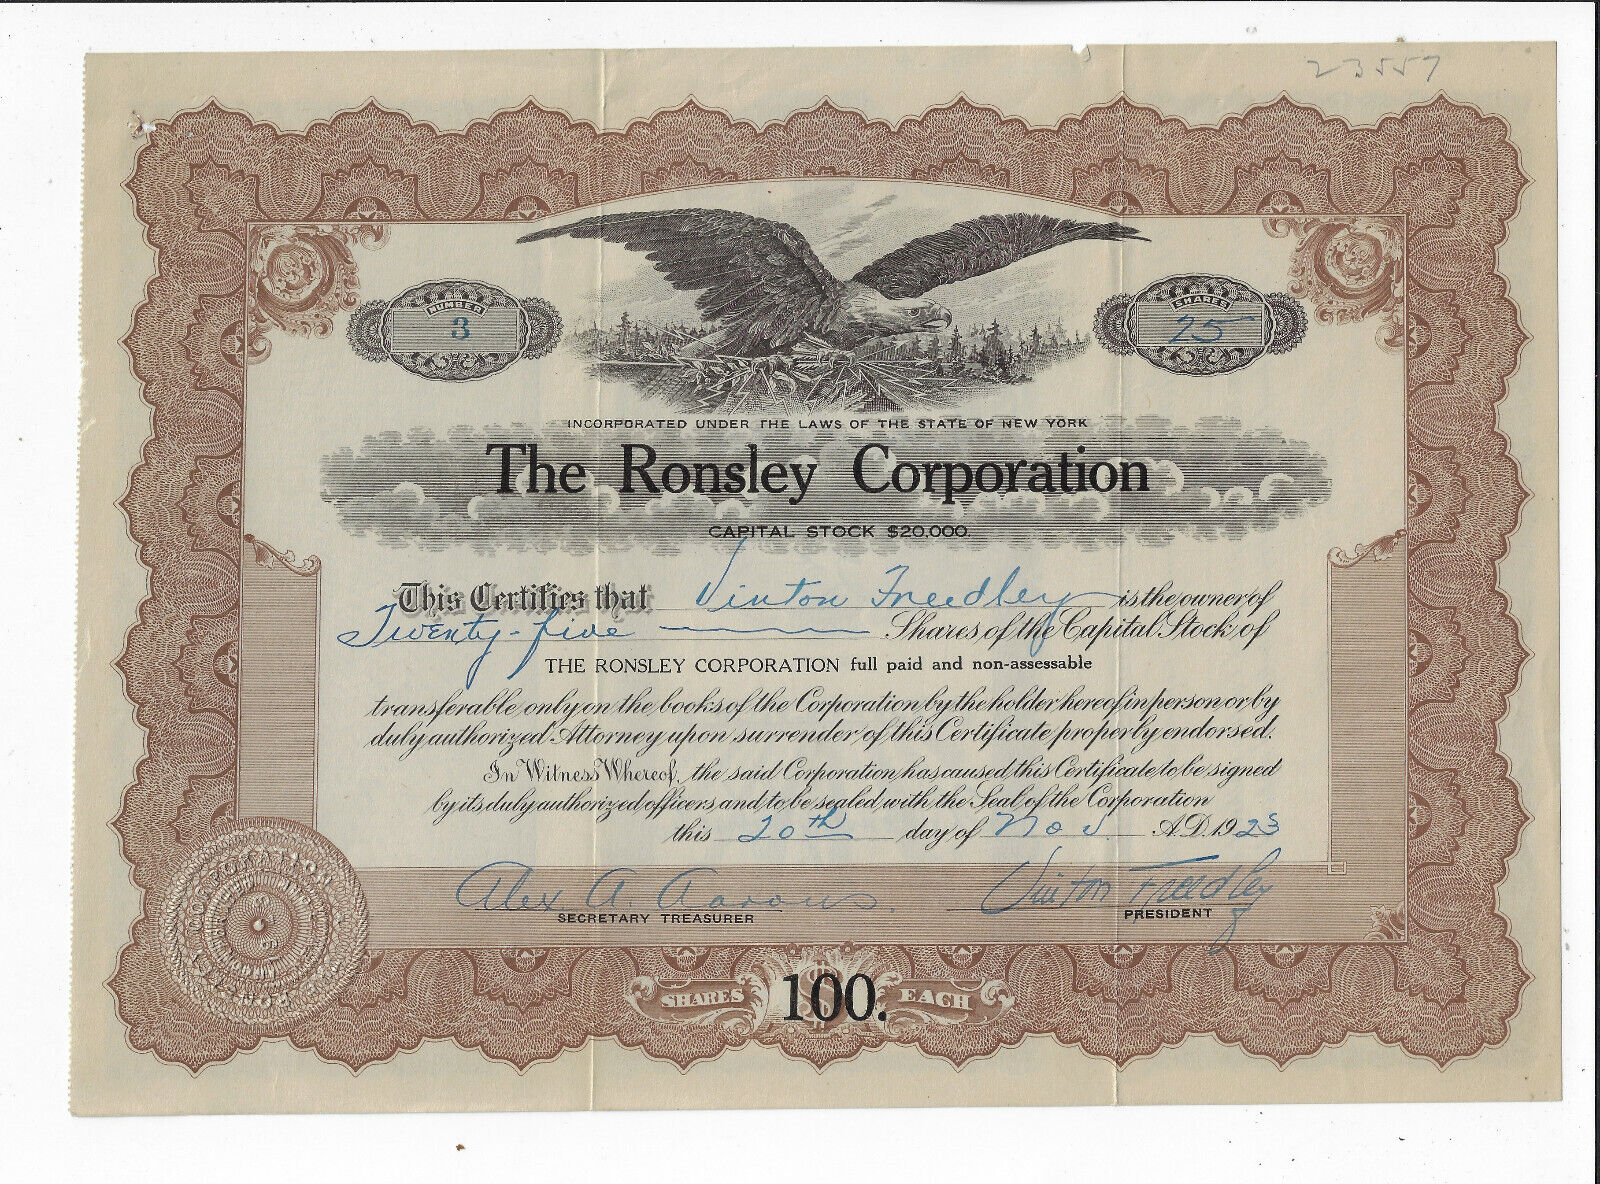 New York 1923 Ronsley Corporation Stock Certificate #3 Vinton Freedley A Aarons